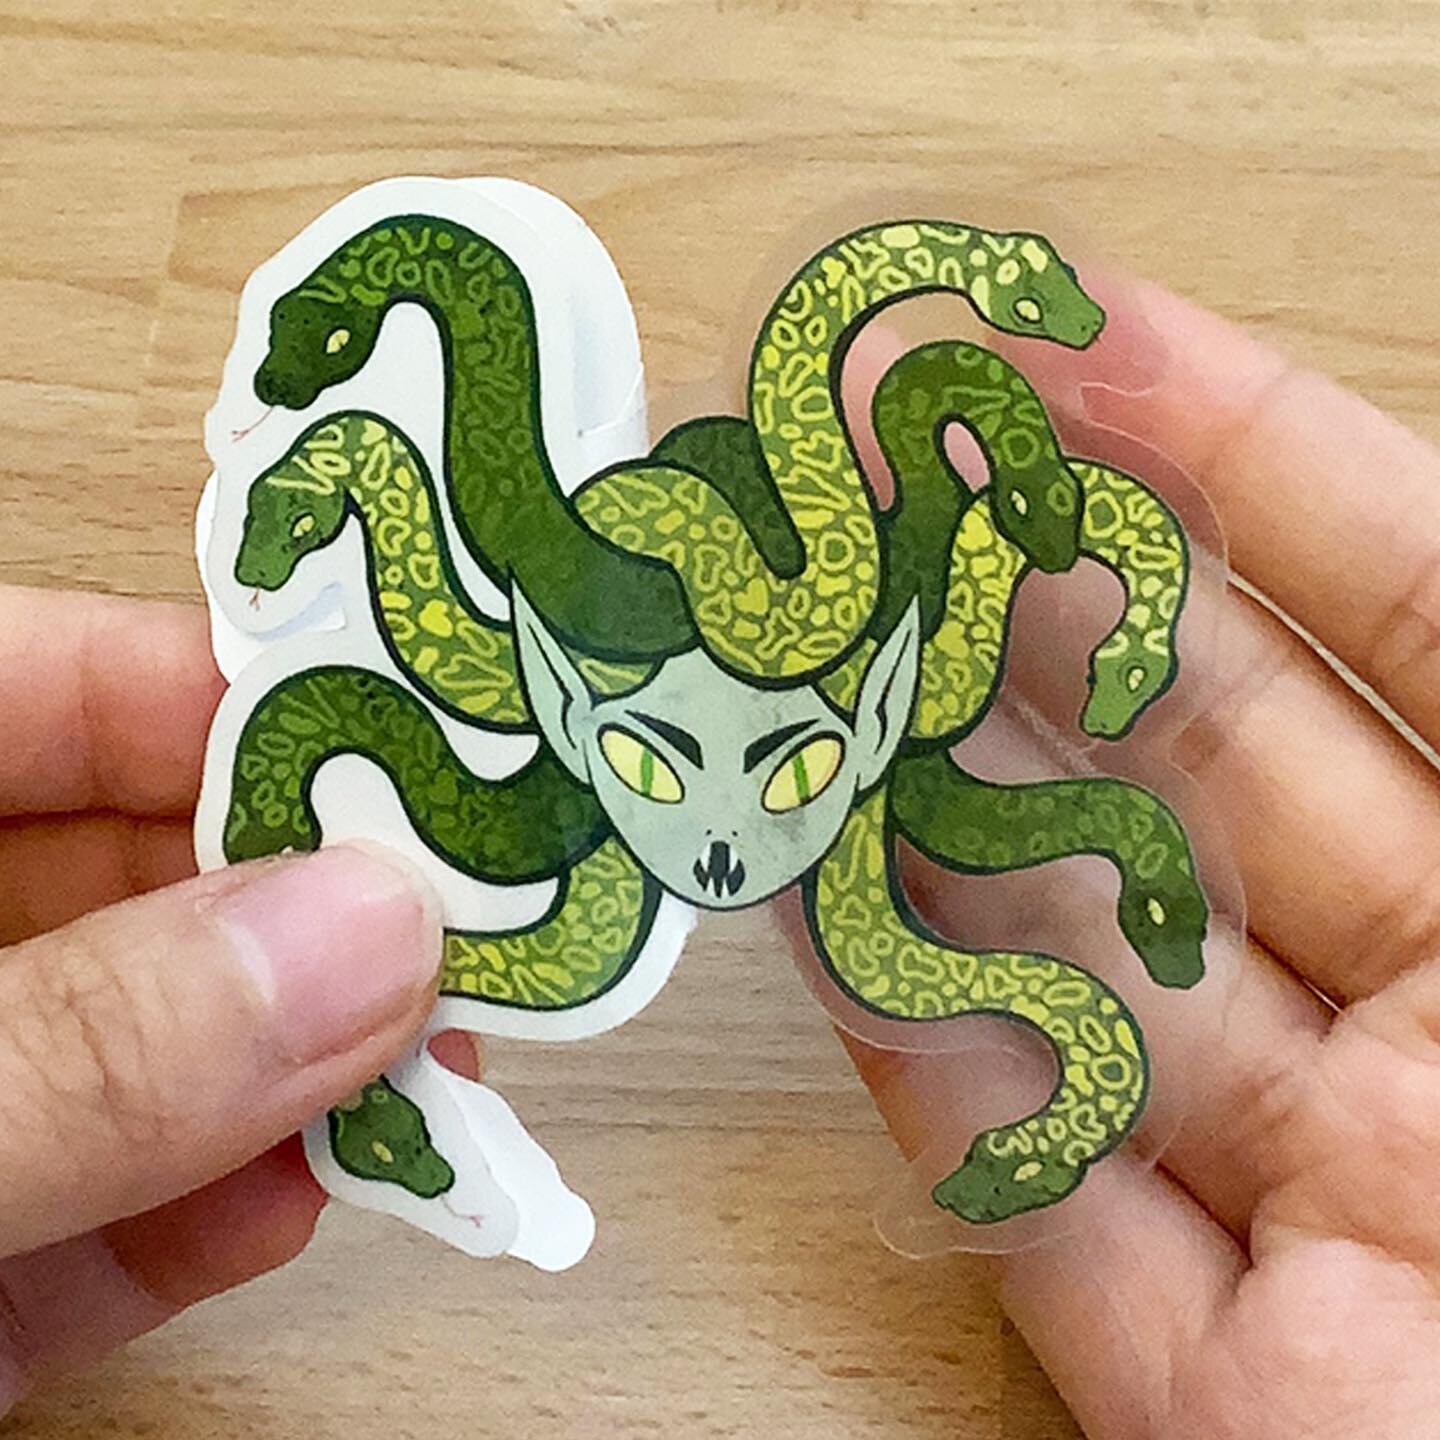 Medusa! 🐍 She&rsquo;s a clear vinyl sticker (very durable and waterproof) available in my shop! This was originally an inktober work from last year that I reworked (many times haha) I like the textures &amp; color variations in this latest version! 